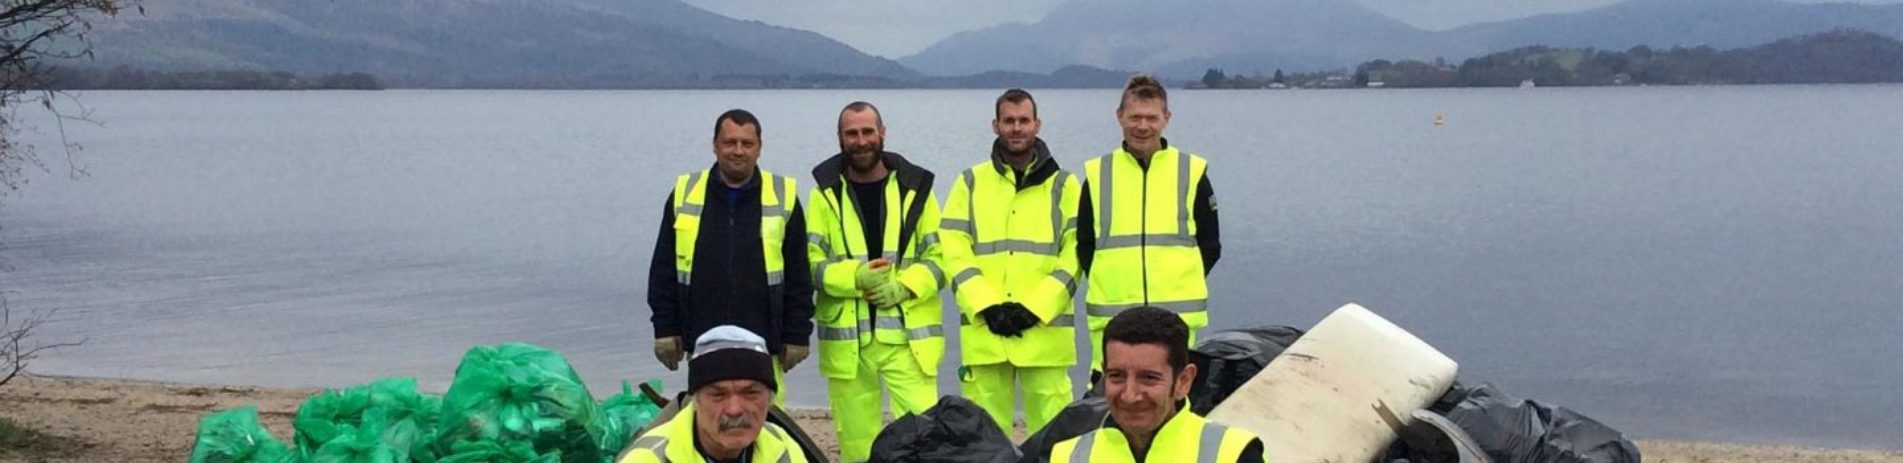 six-men-dressed-in-high-viz-clothes-with-dozens-of-bin-bags-aligned-in-front-of-them-on-the-edge-of-loch-lomond-from-spring-clean-campaign